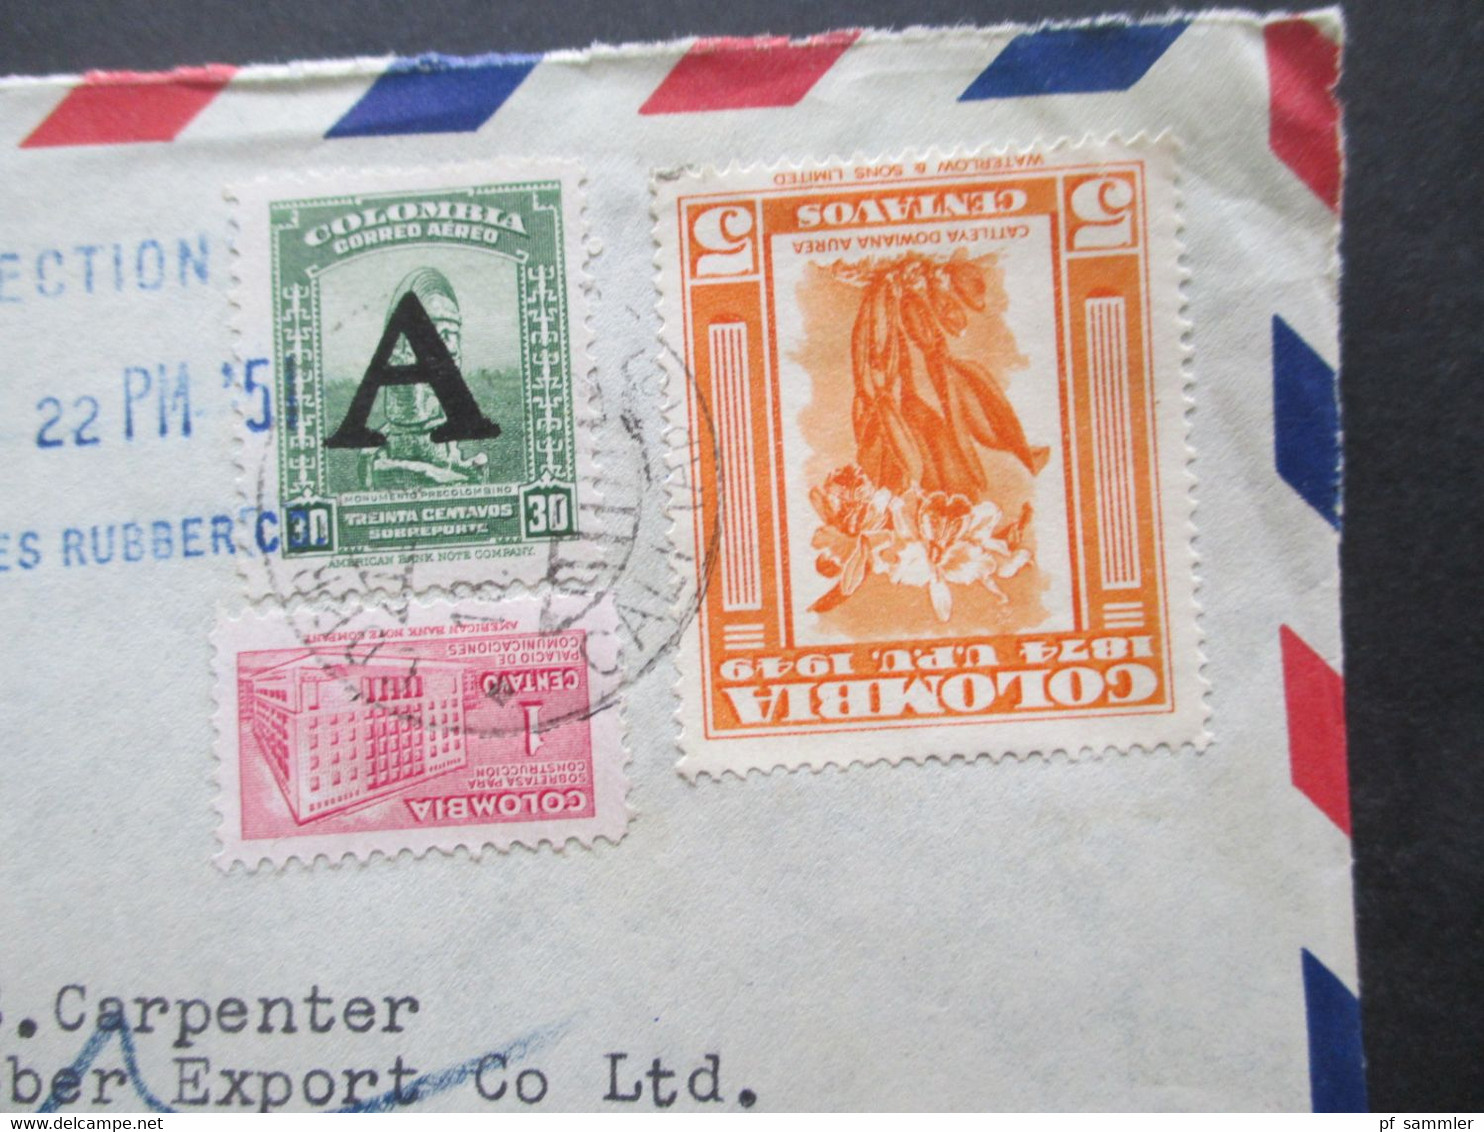 Kolumbien Colombia 1951 Firmenumschlag Compania Croydon Del Pacifico S.A. Blauer Eingangsstempel Mail Section Rubber - Colombia